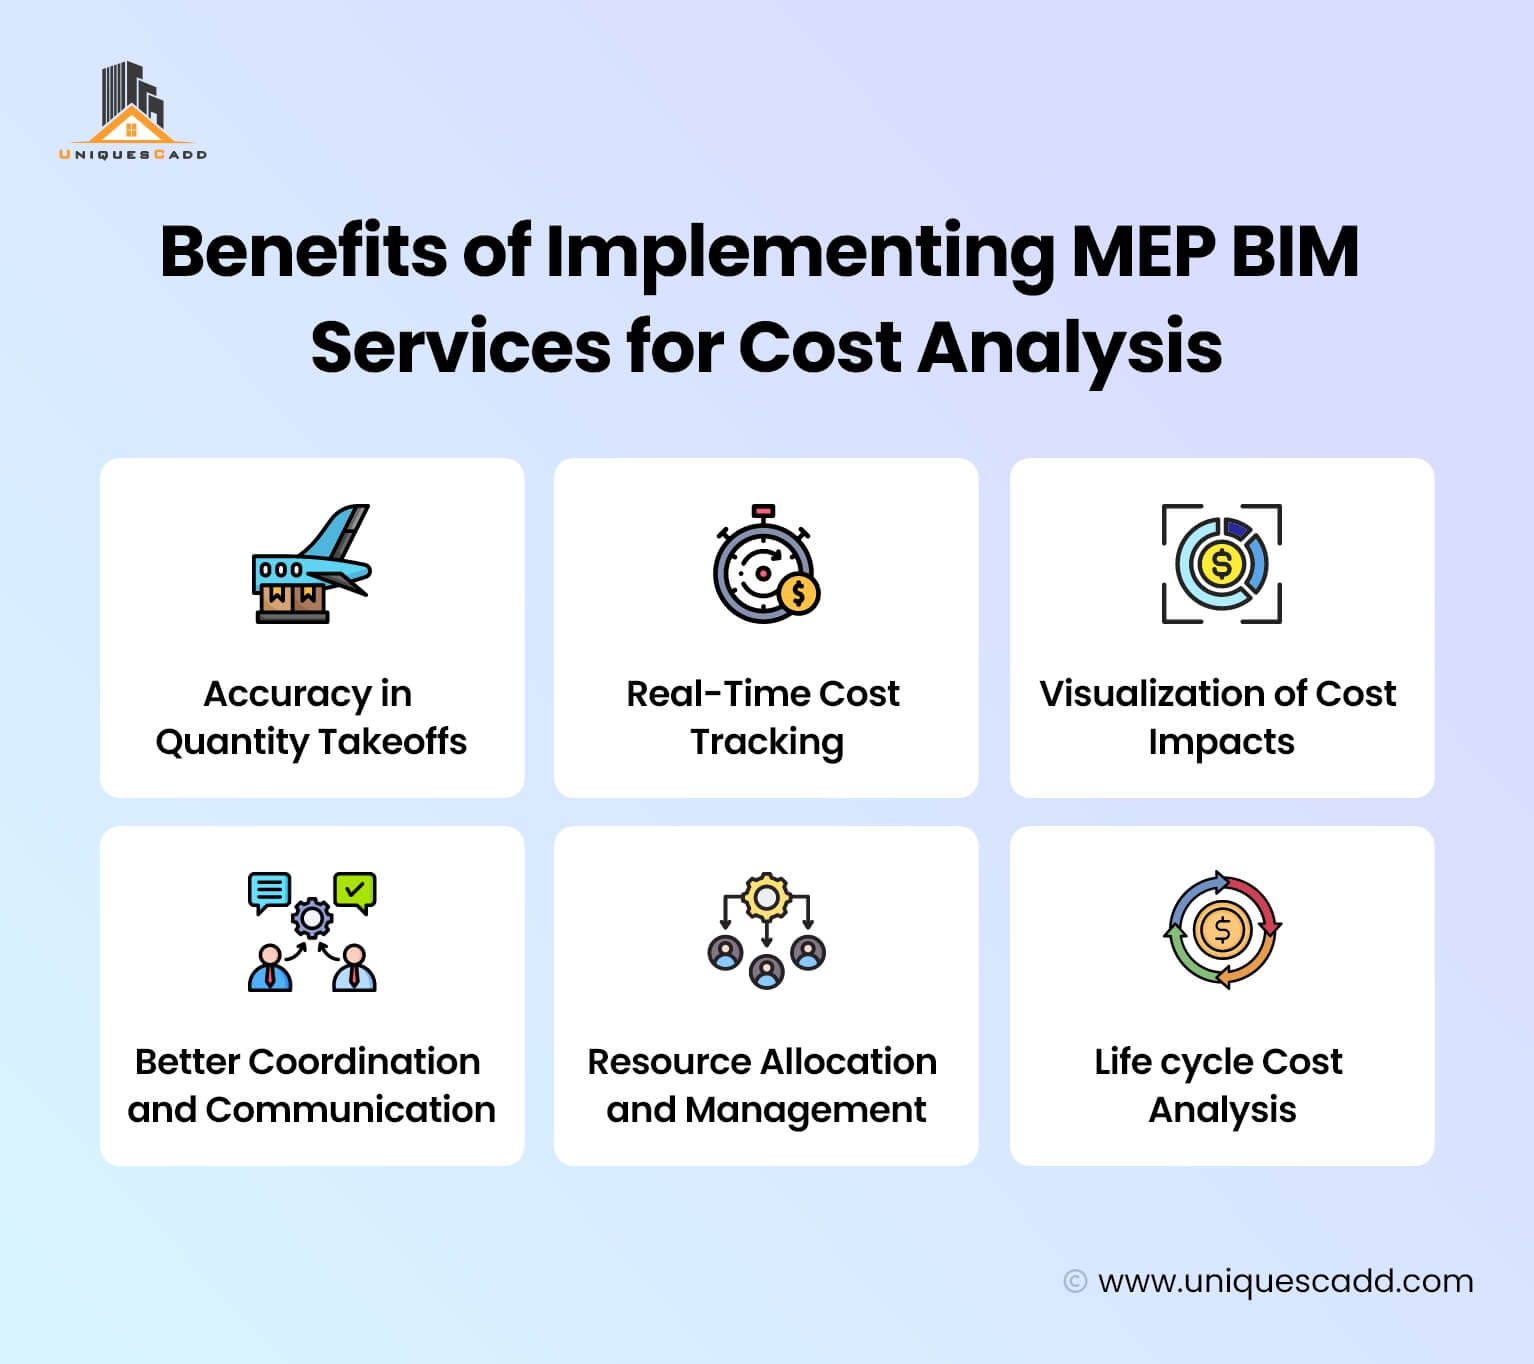 Benefits of Implementing MEP BIM Services for Cost Analysis